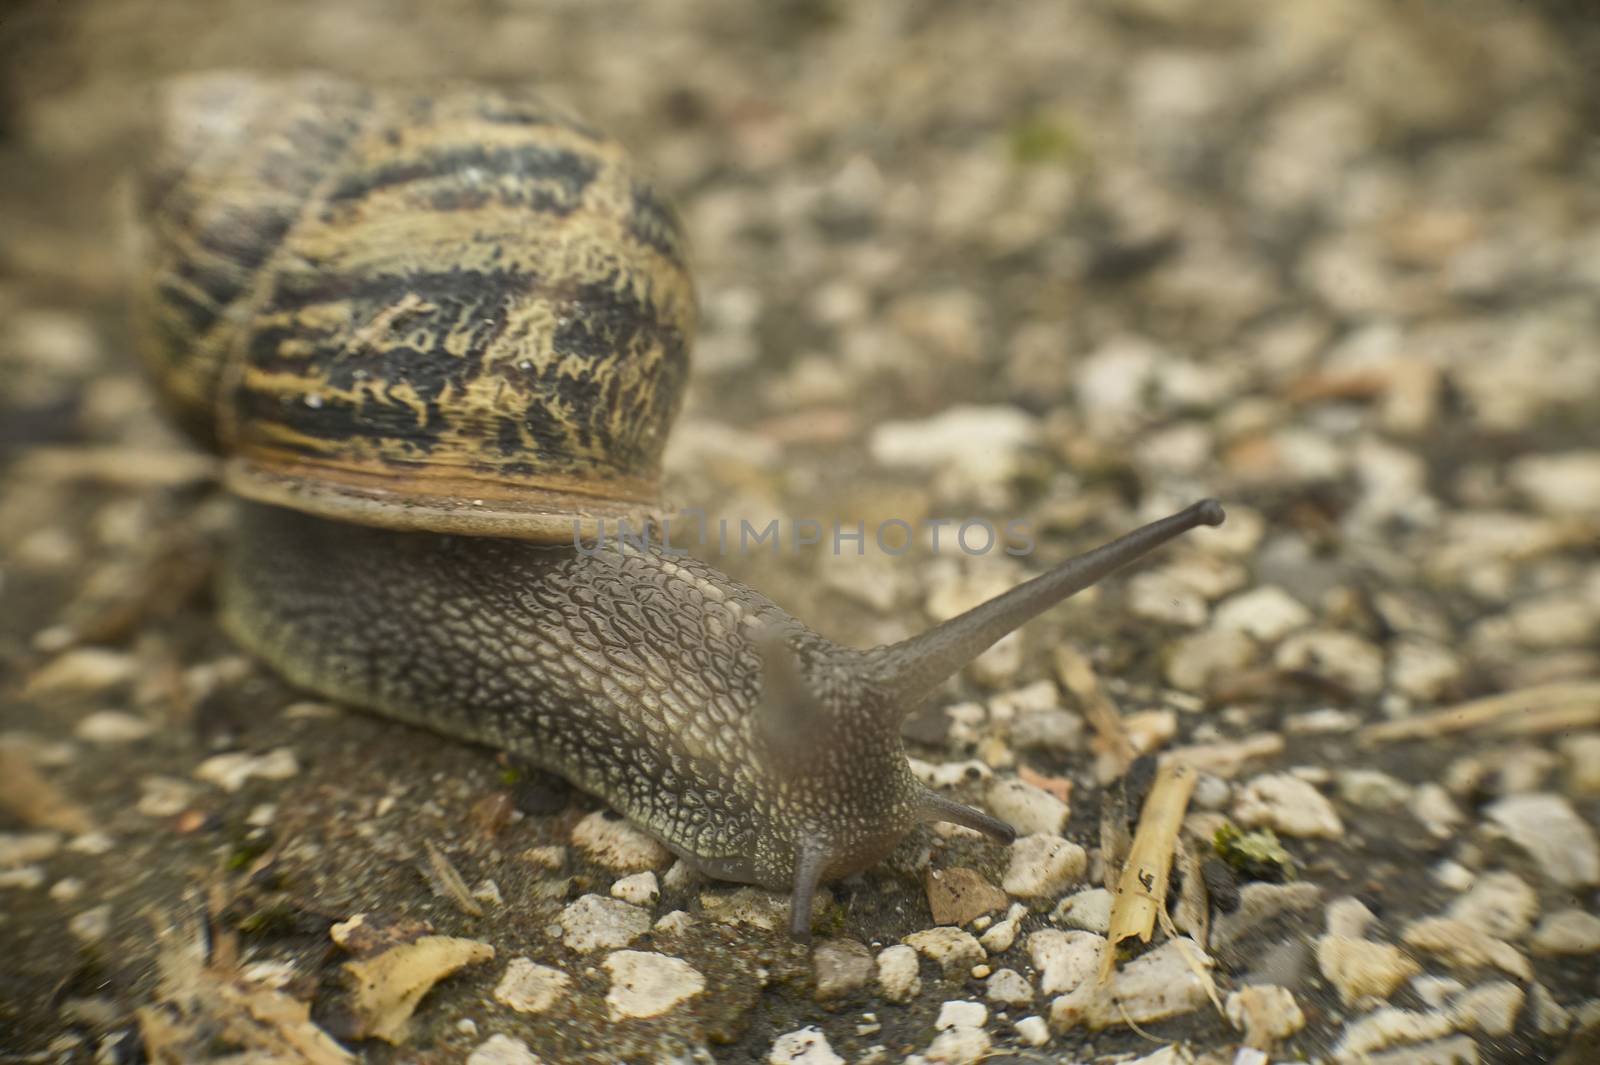 Small snail crawling slowly on a piece of asphalt looking for food